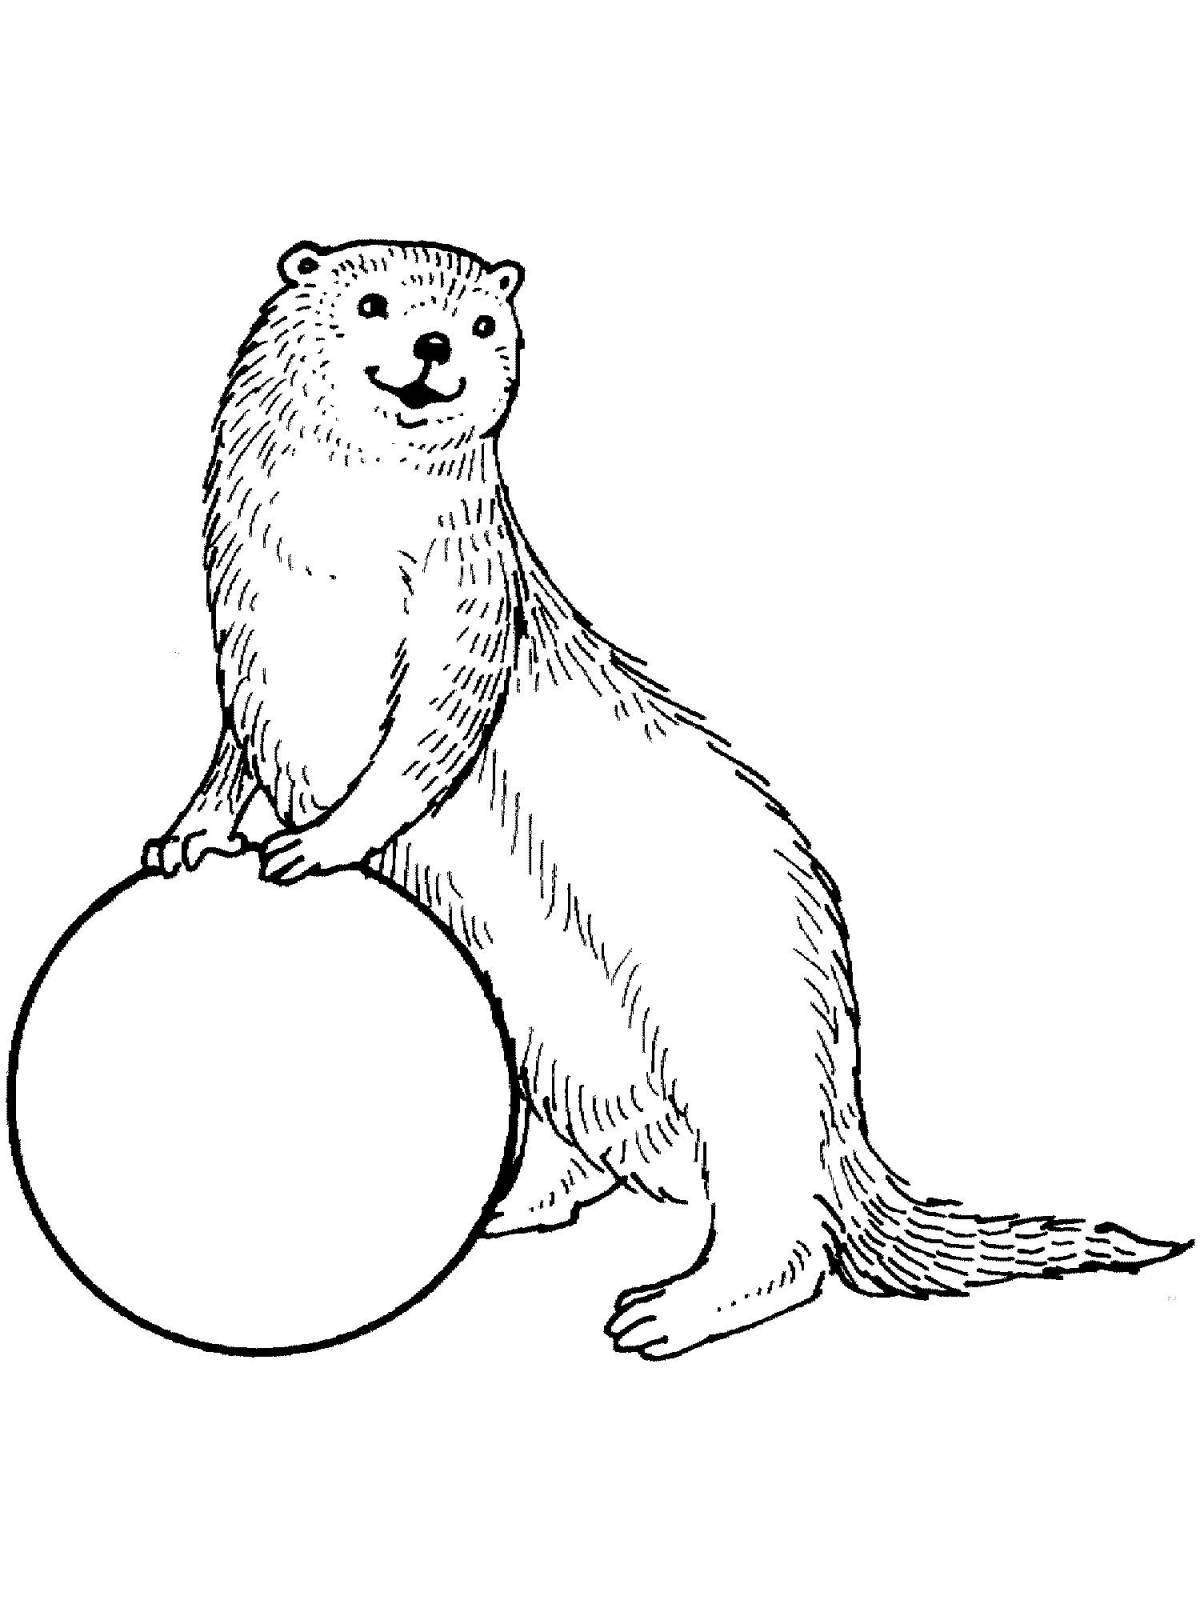 Adorable mongoose coloring page